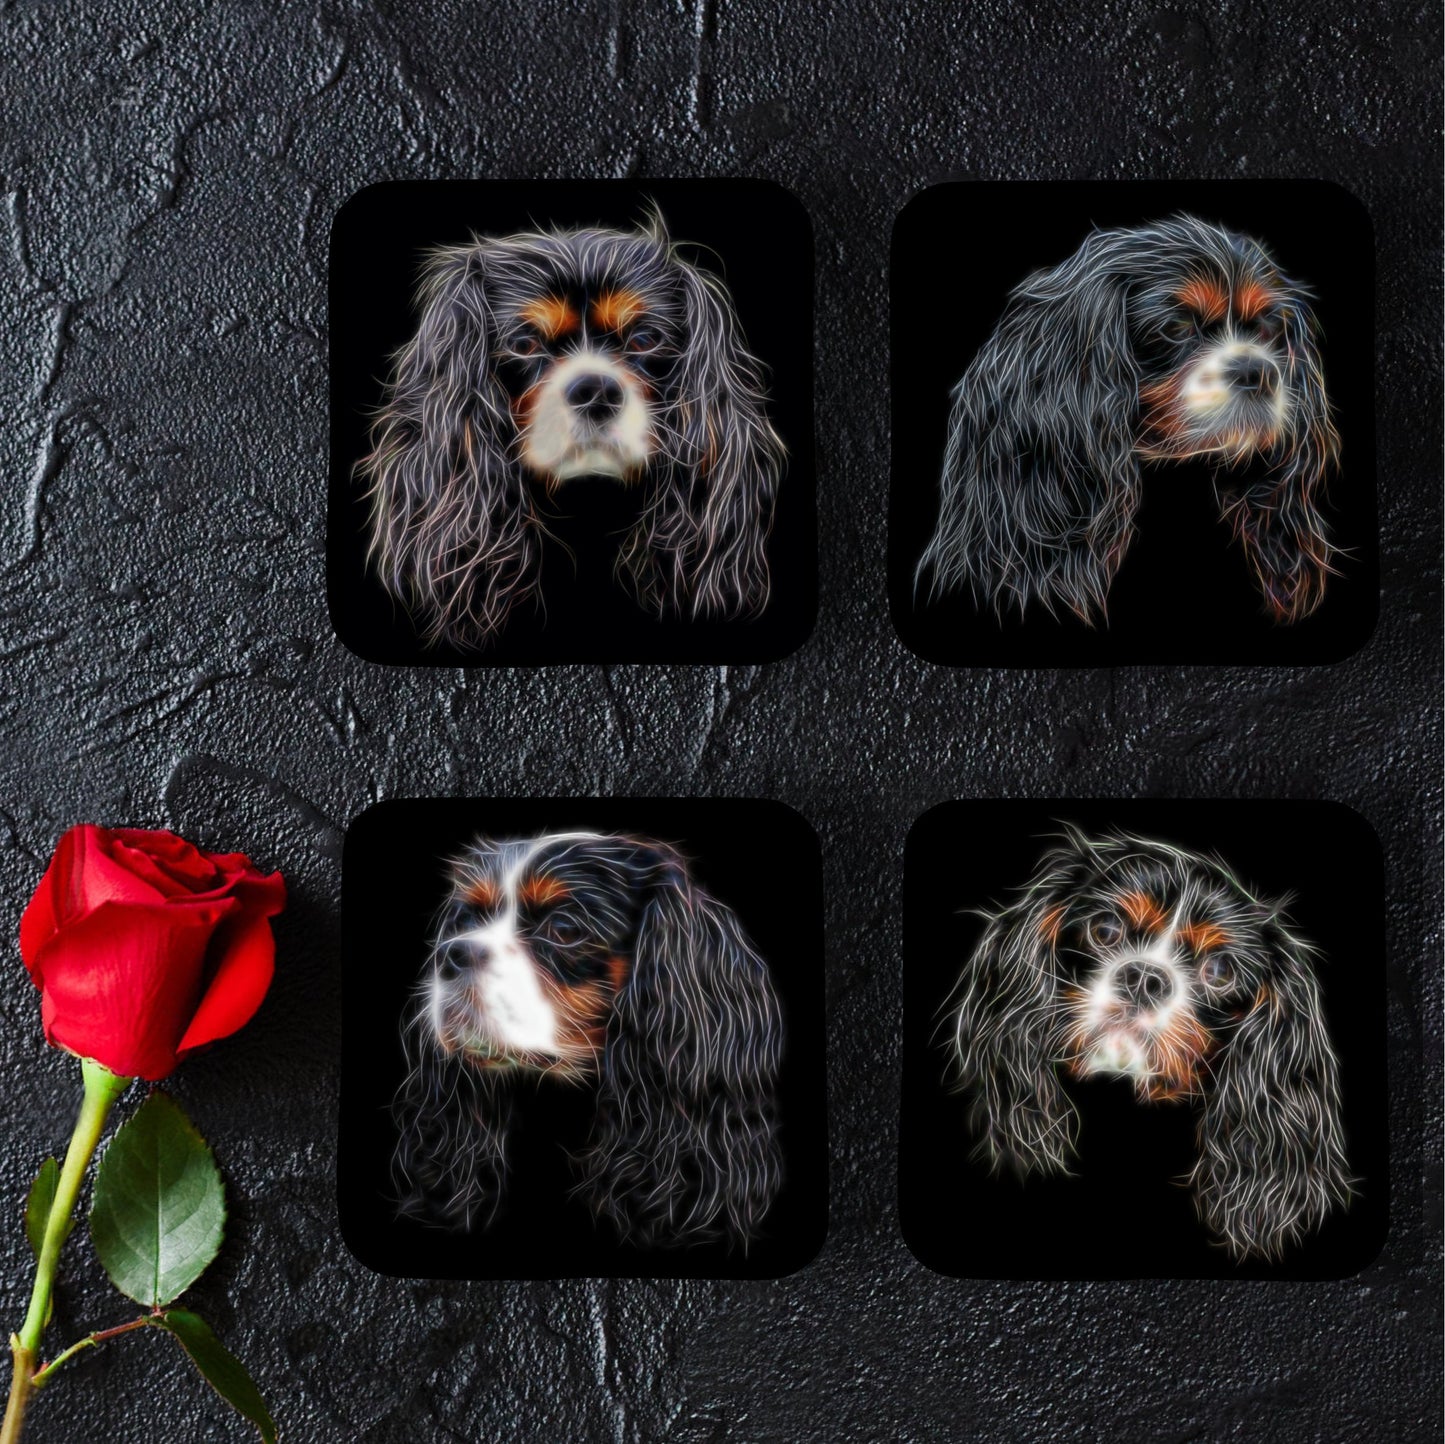 Tricolour King Charles Spaniel Coasters, Set of 4, with Fractal Art Design